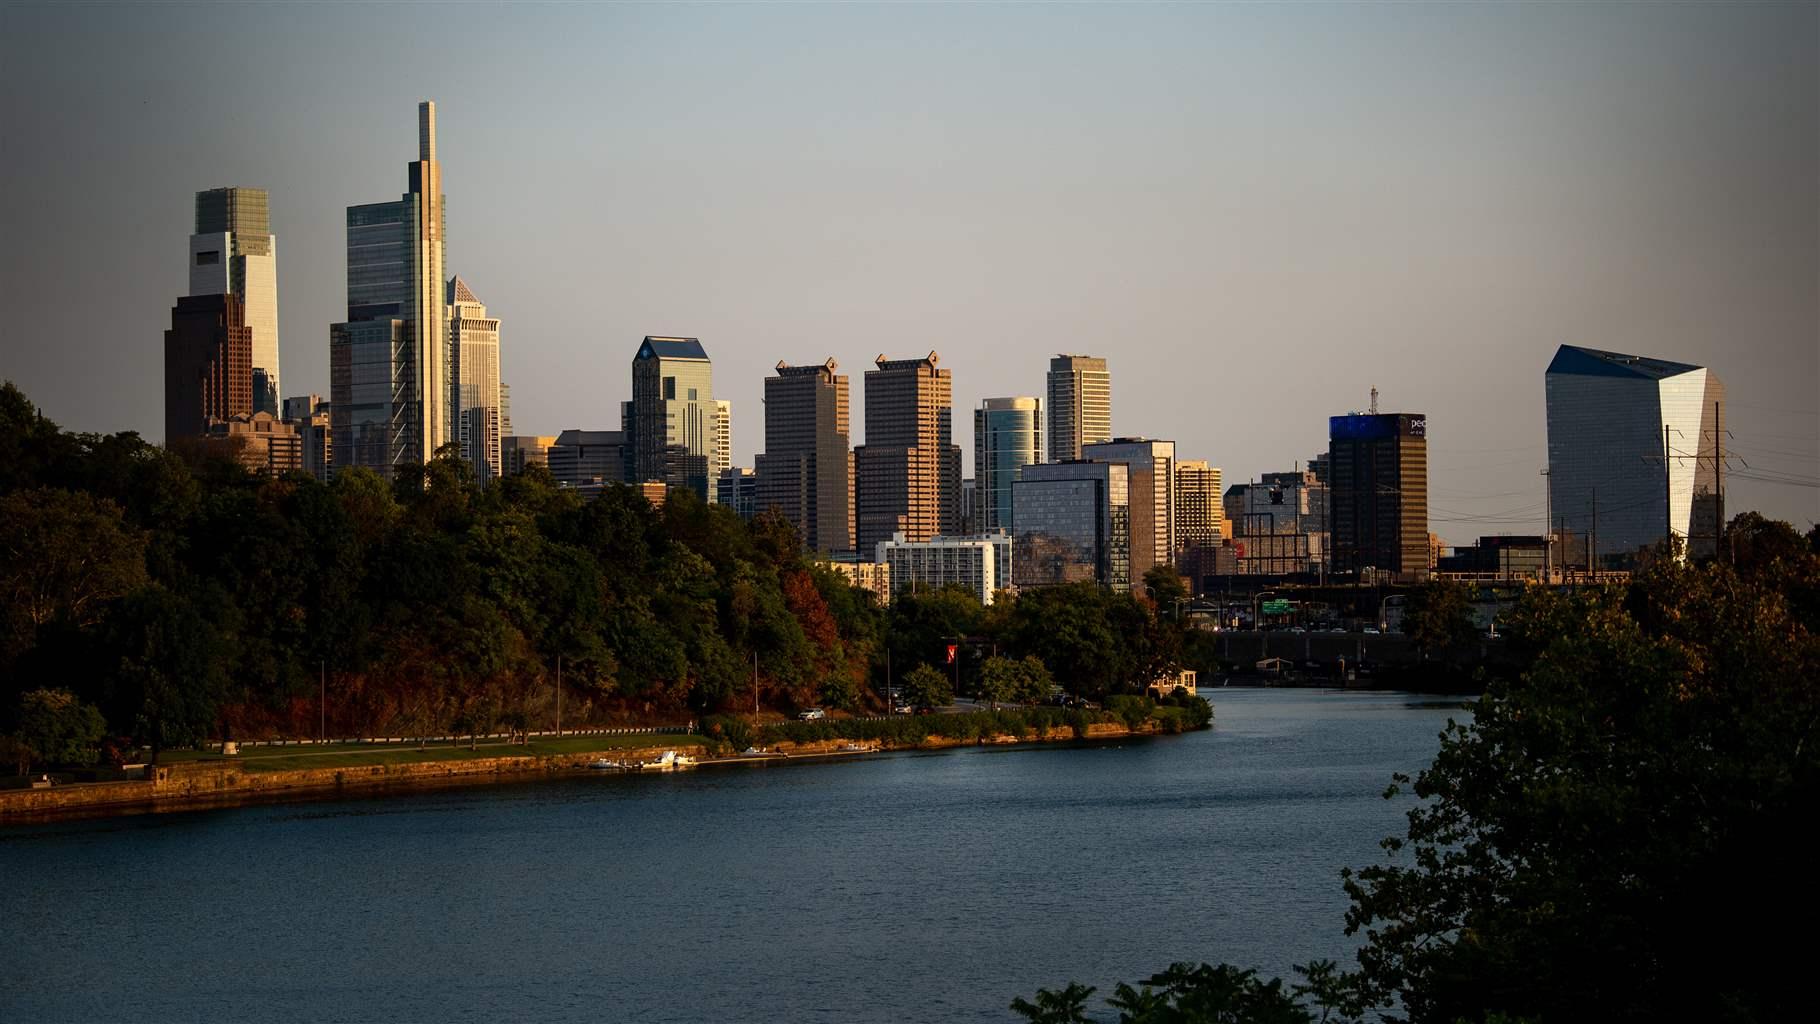 A view of one of Philadelphia’s major rivers in the foreground, framed by tree-lined banks, with the skyscrapers that form the city’s skyline towering in the distance.